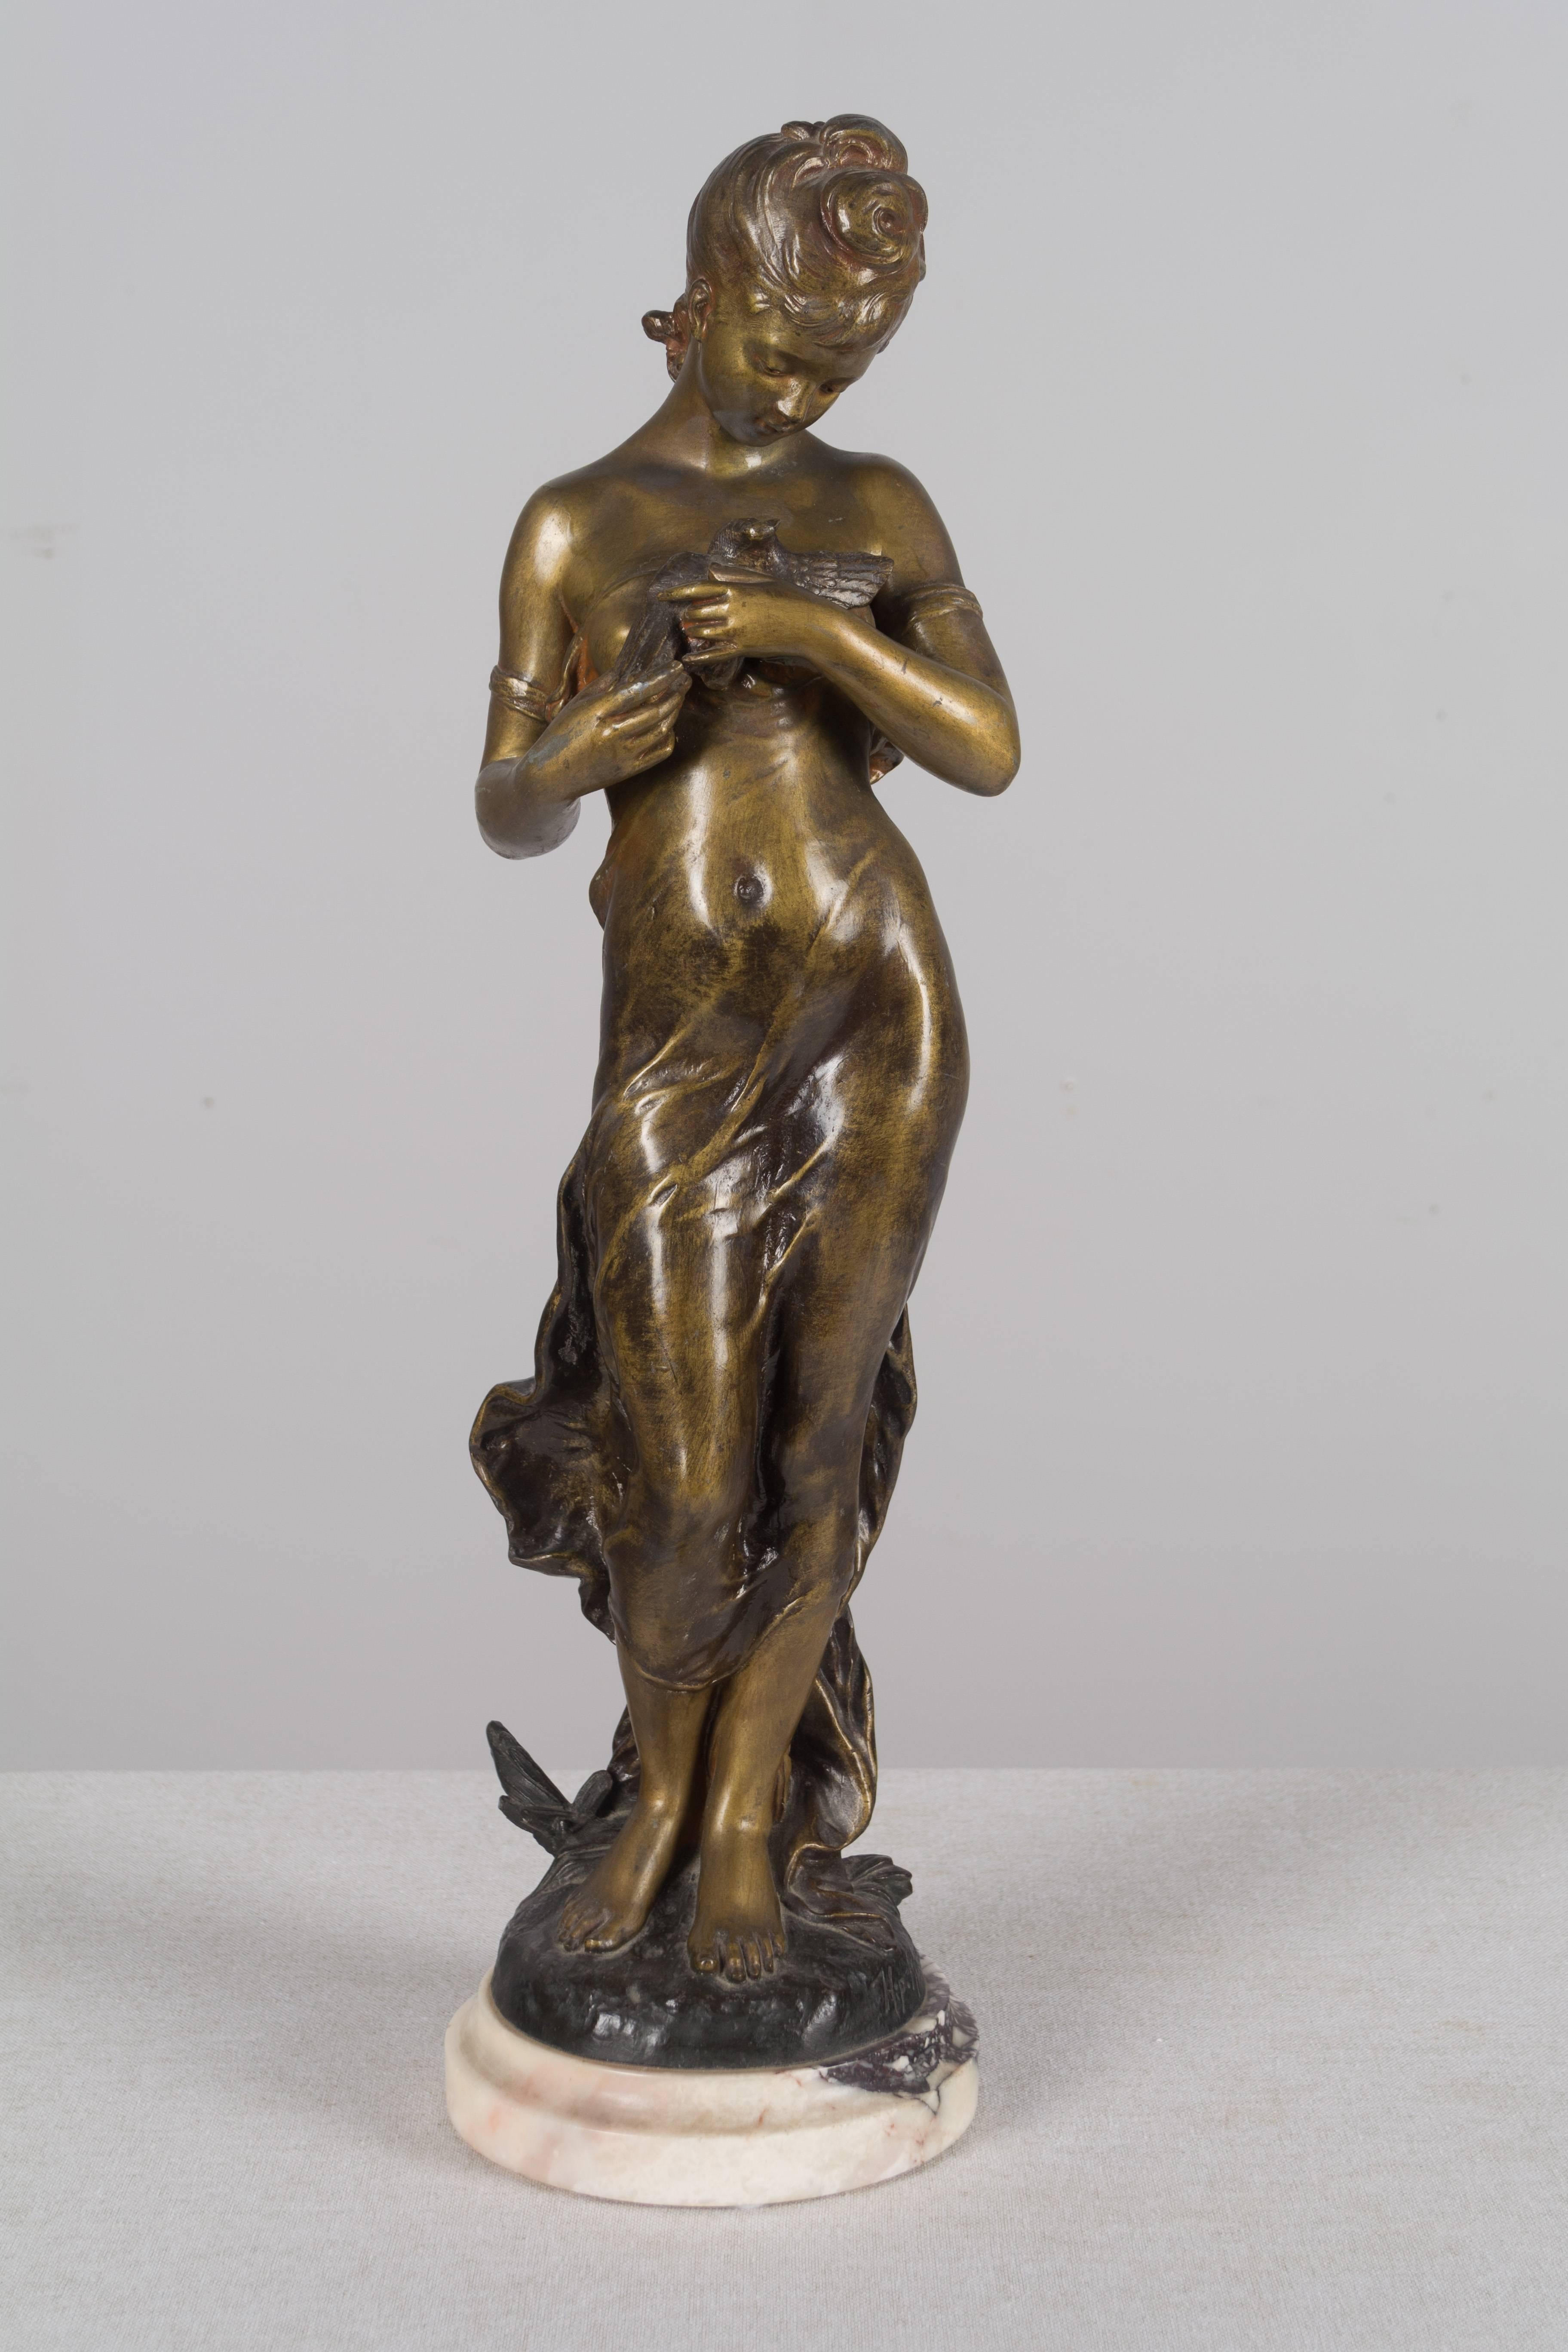 20th Century French Sculpture by Hippolyte Moreau